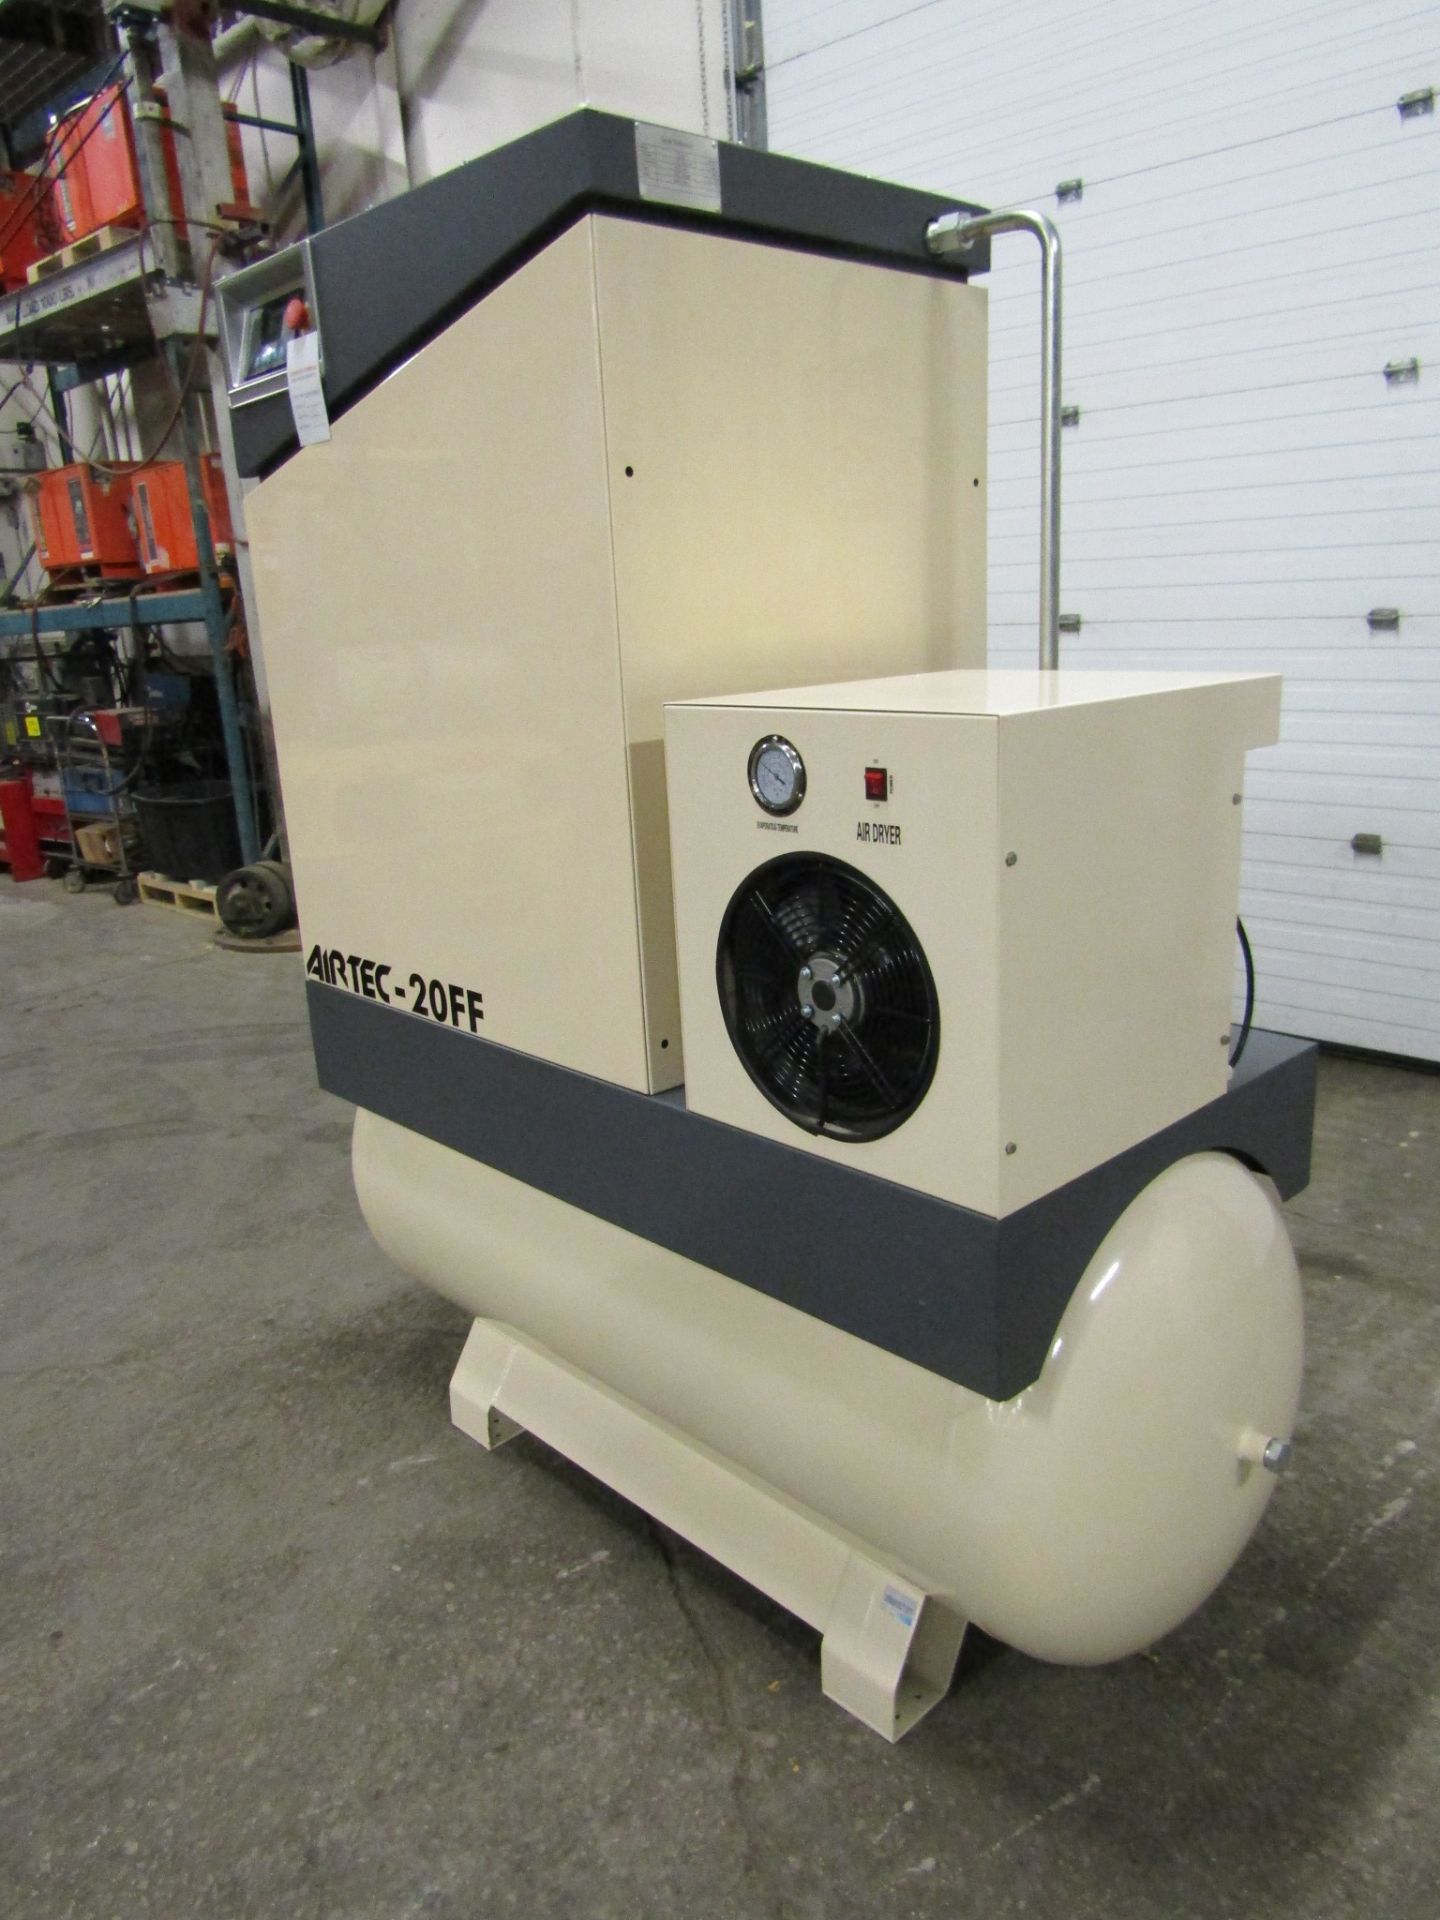 Airtec model 20FF - 20HP Air Compressor with built on DRYER - MINT UNUSED COMPRESSOR with 125 Gallon - Image 3 of 3